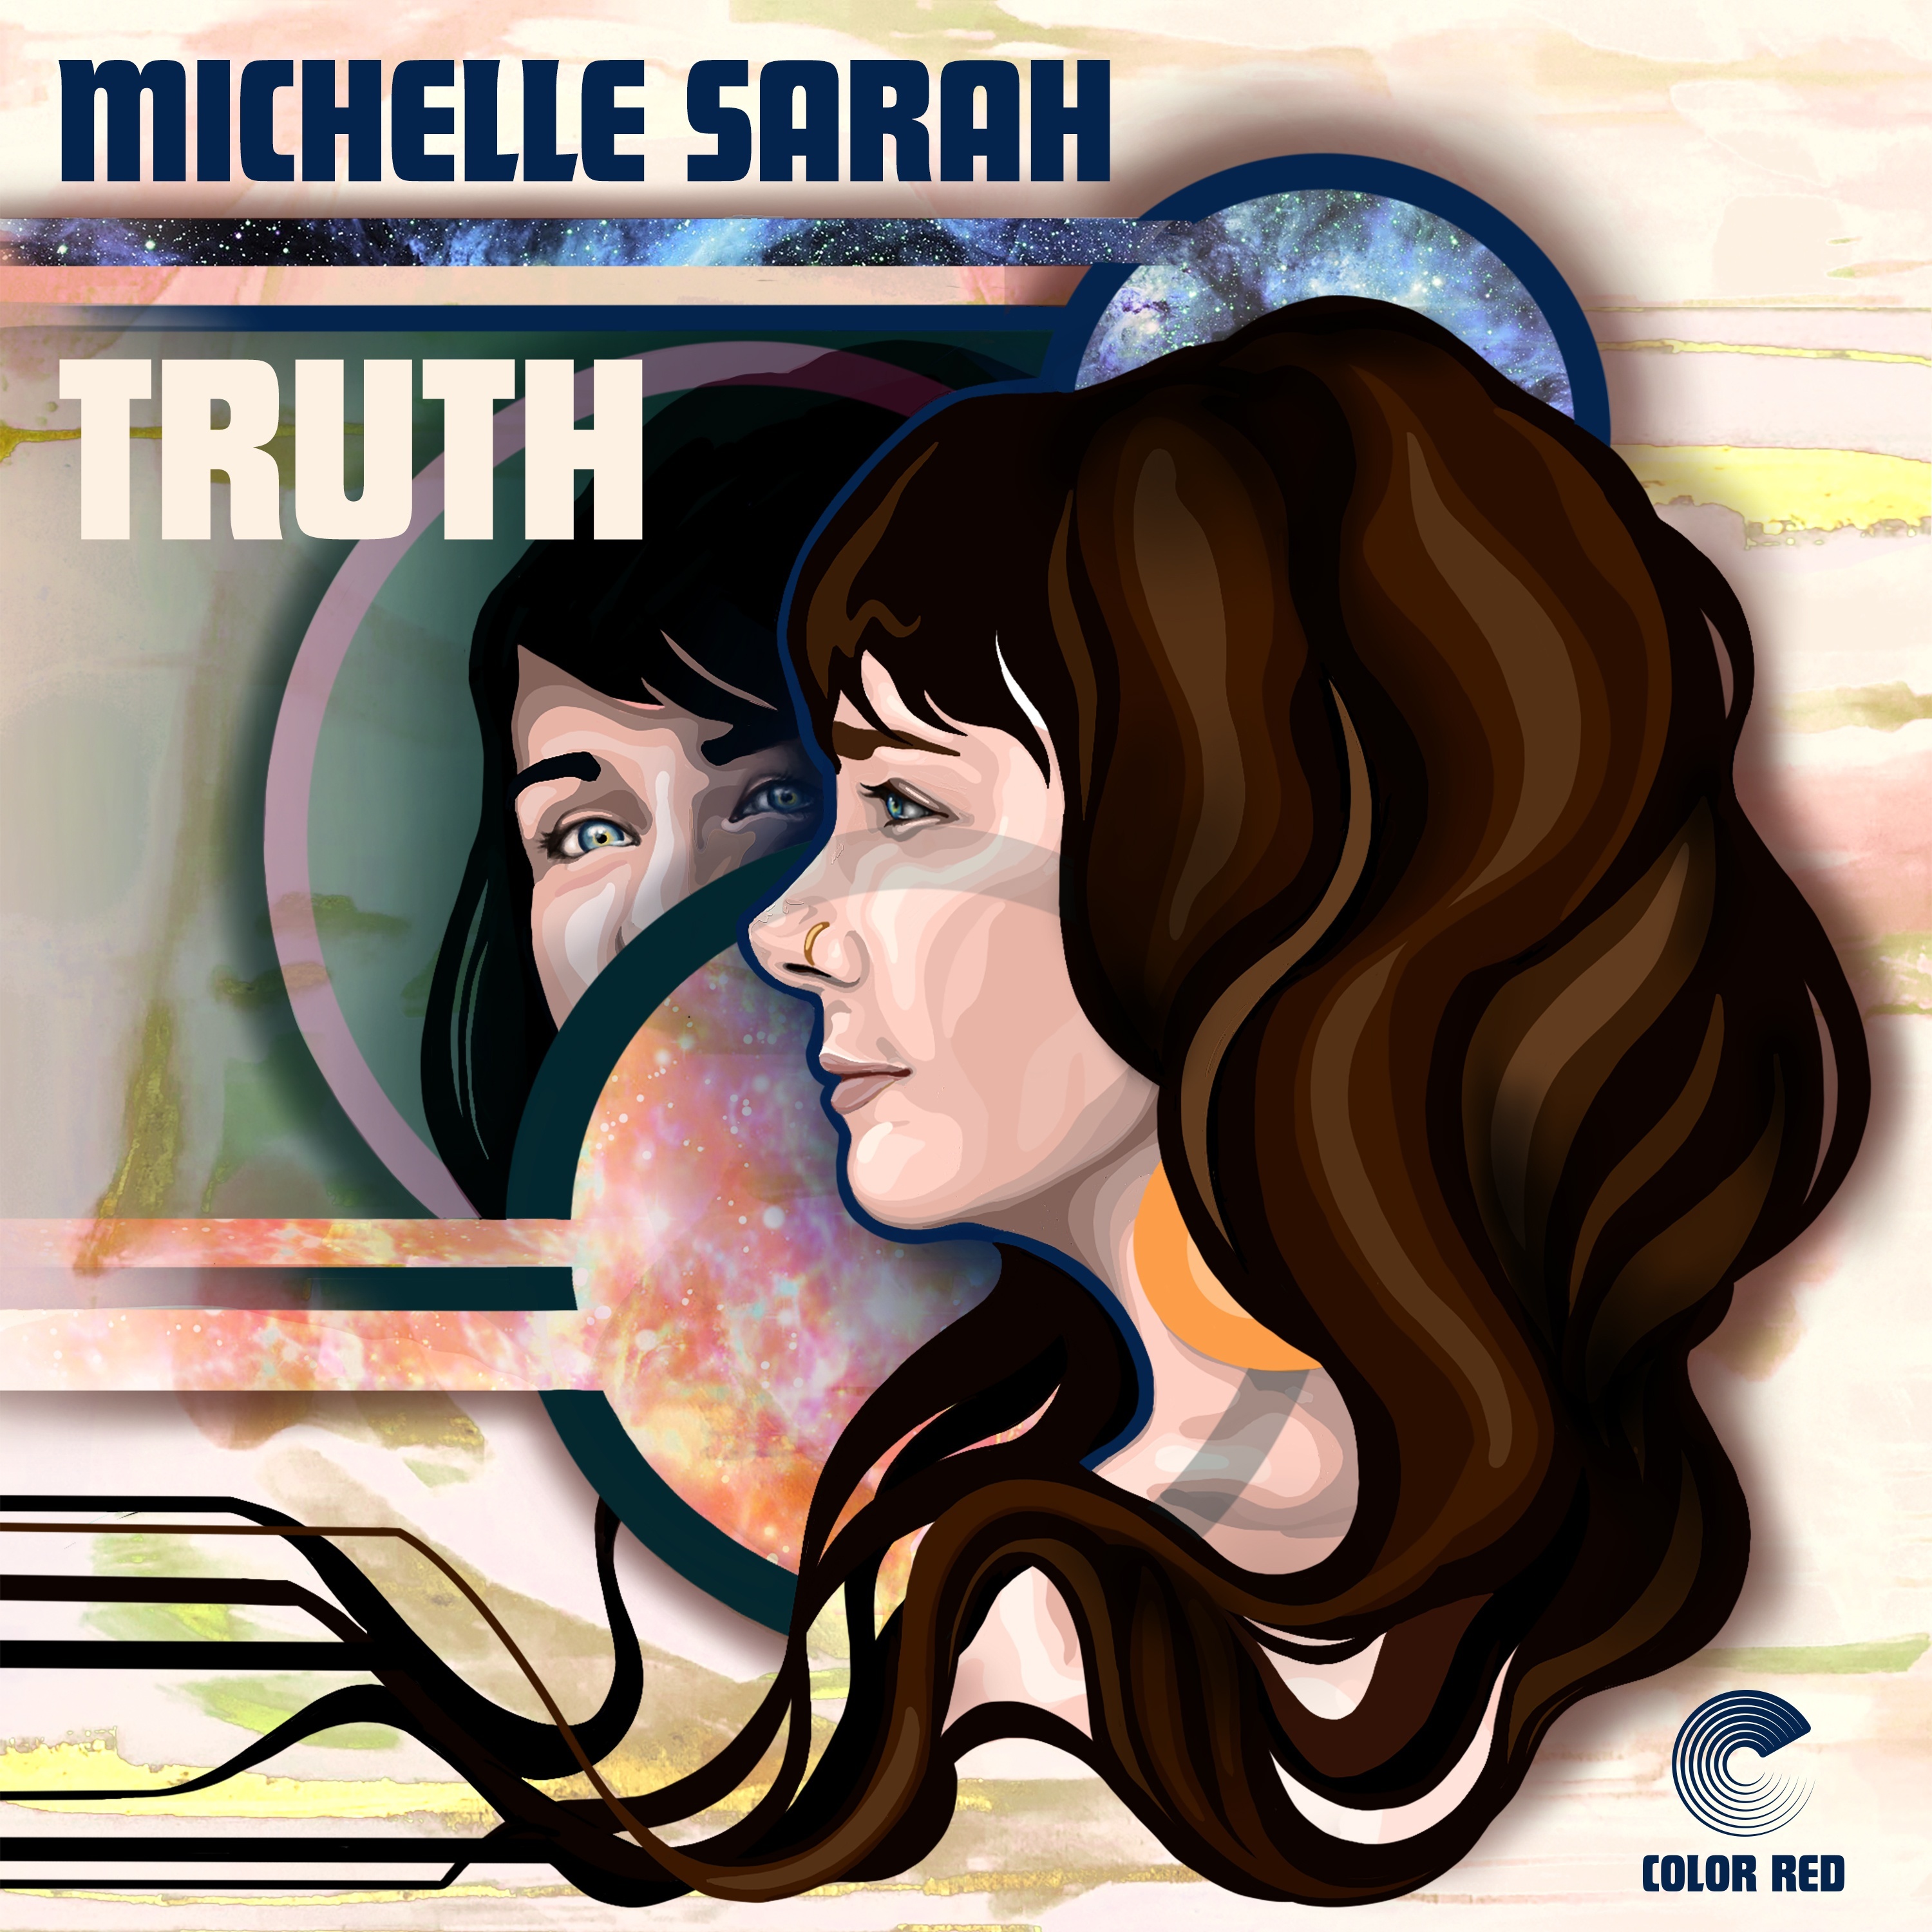 Michelle Sarah set to release "Truth"